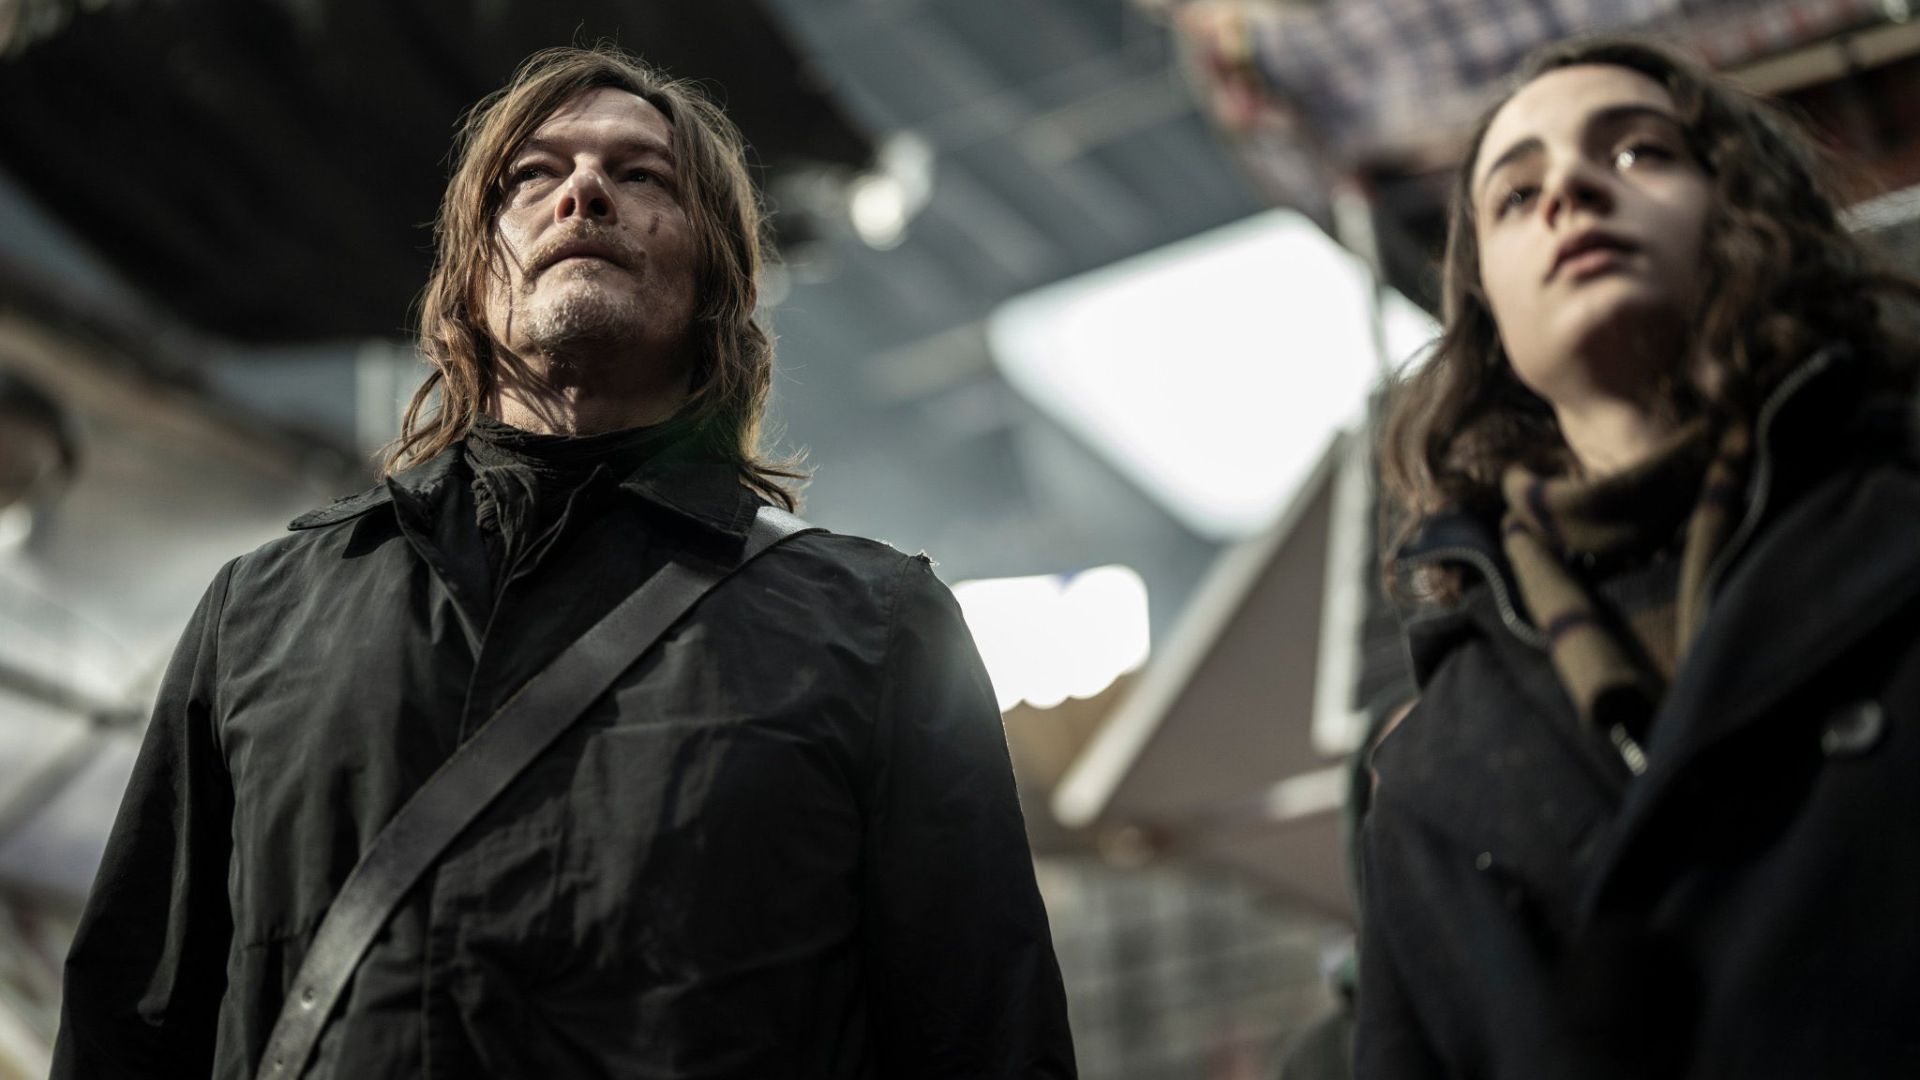 How to watch The Walking Dead: Dead City in the UK